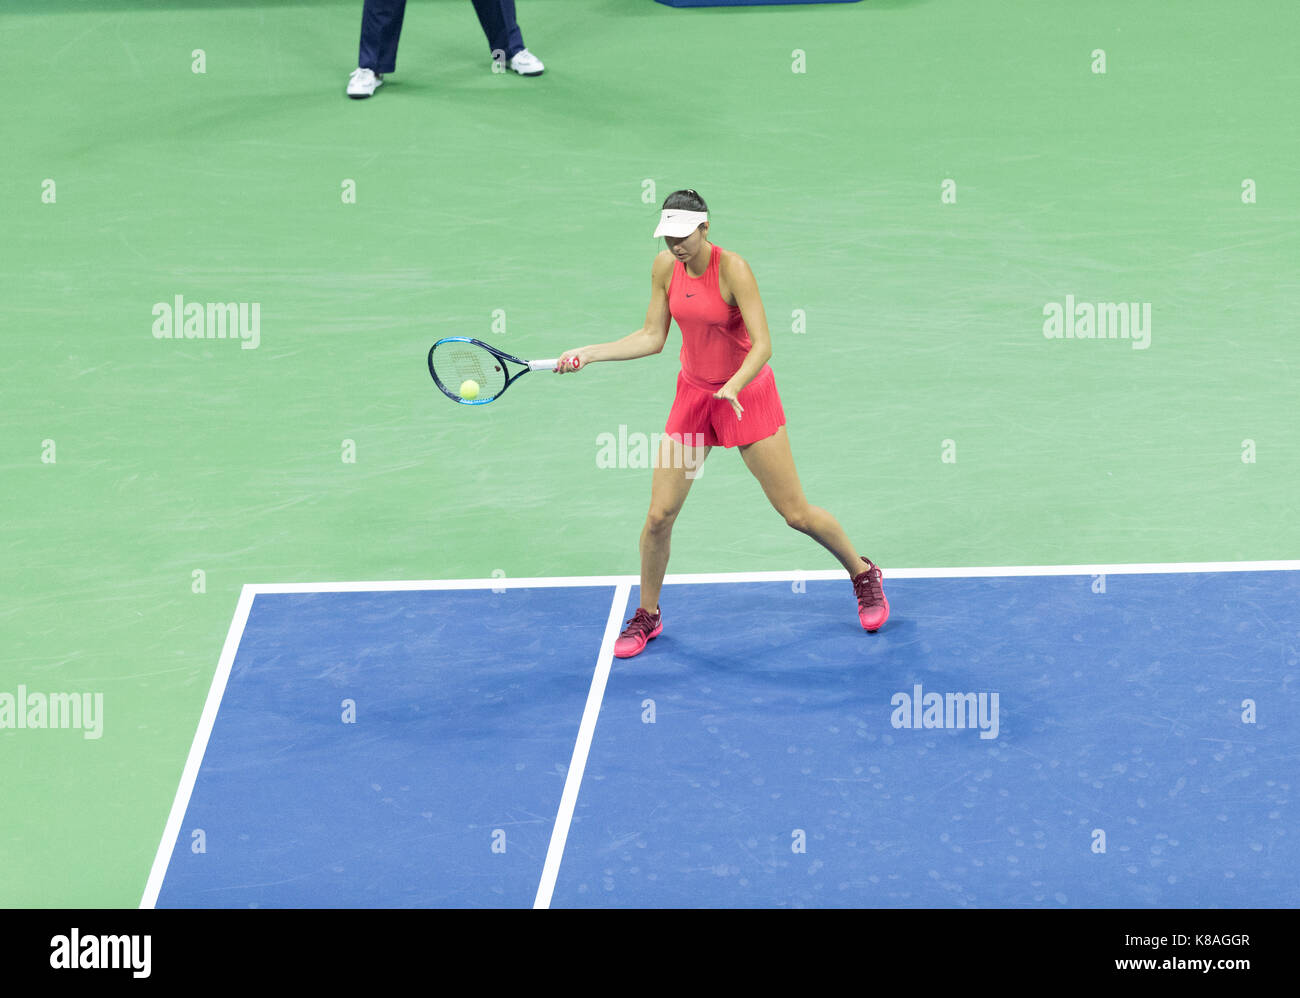 New York, NY USA - August 30, 2017: Oceane Dodin of France returns ball during match against Venus Williams of USA at US Open Championships at Billie Jean King National Tennis Center Stock Photo